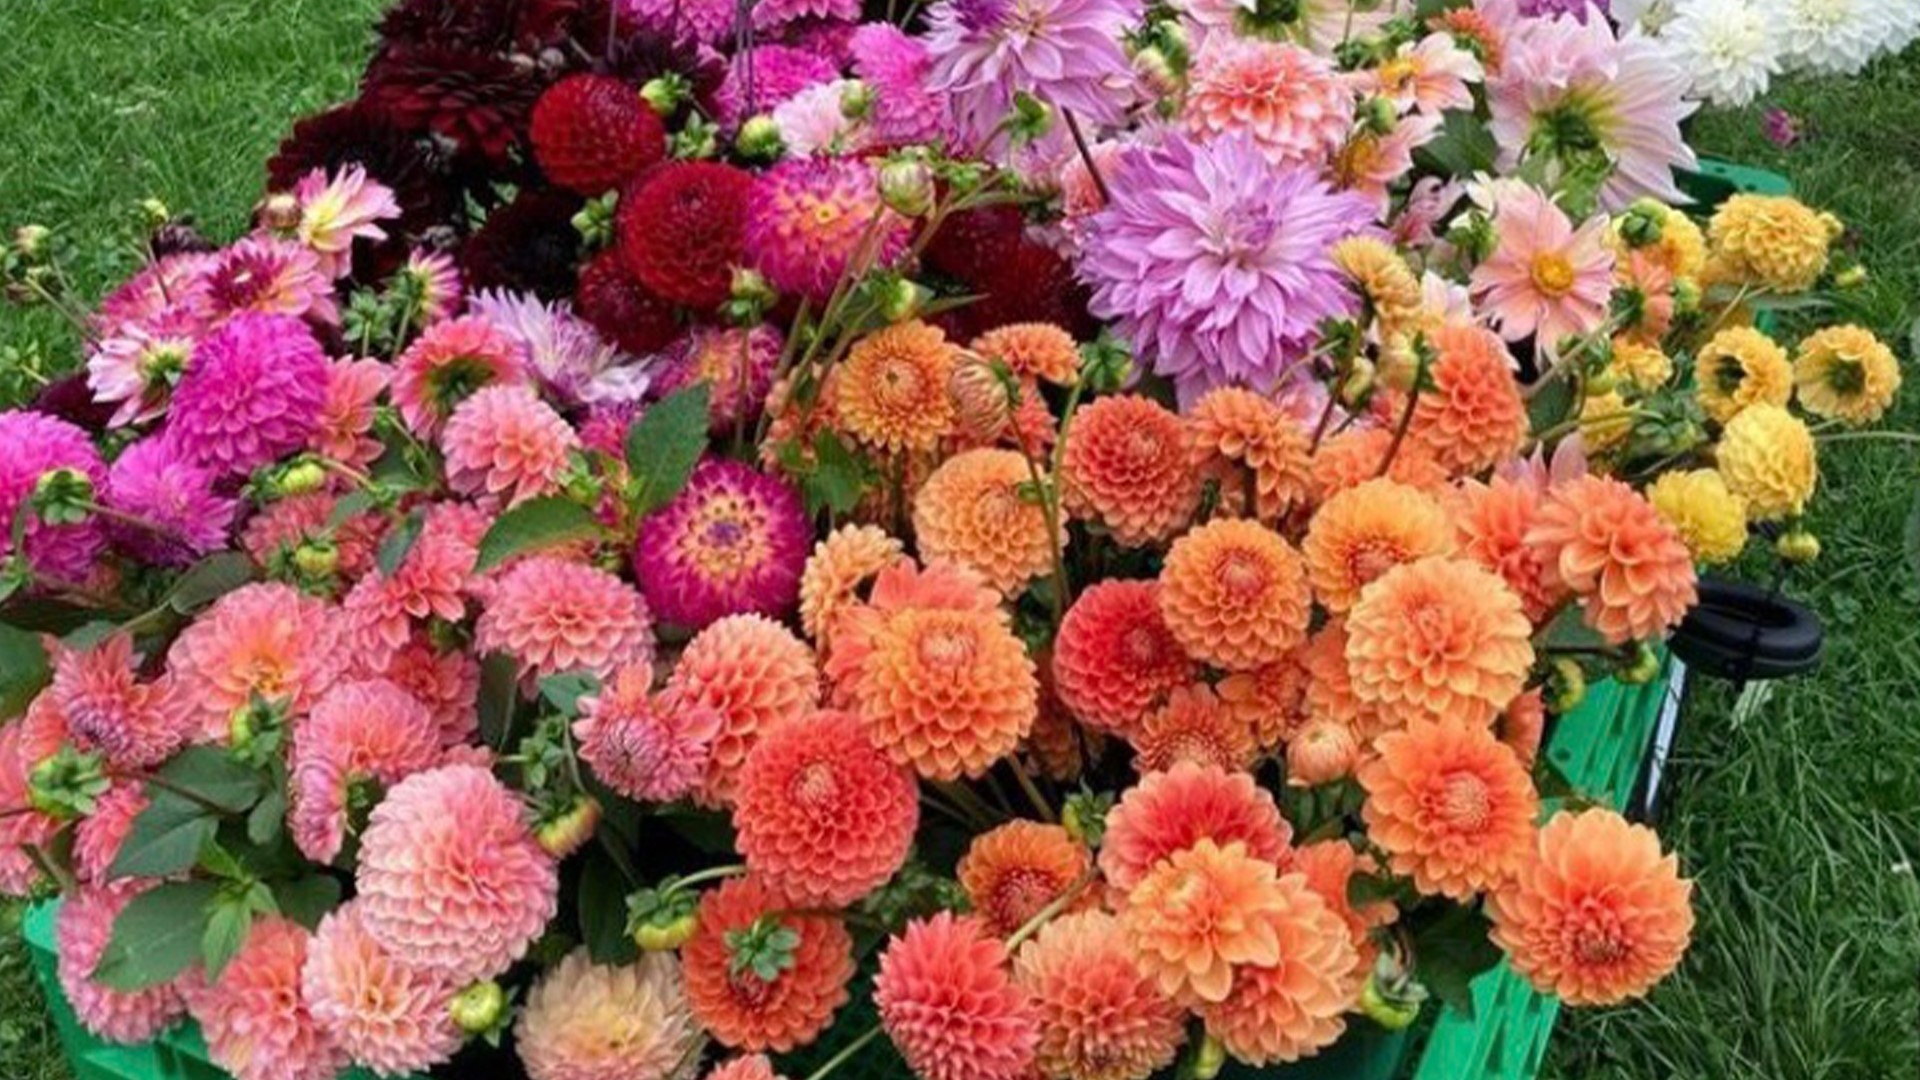 Storing Dahlia tubers correctly for the winter leads to even more beautiful blooms for the summer.